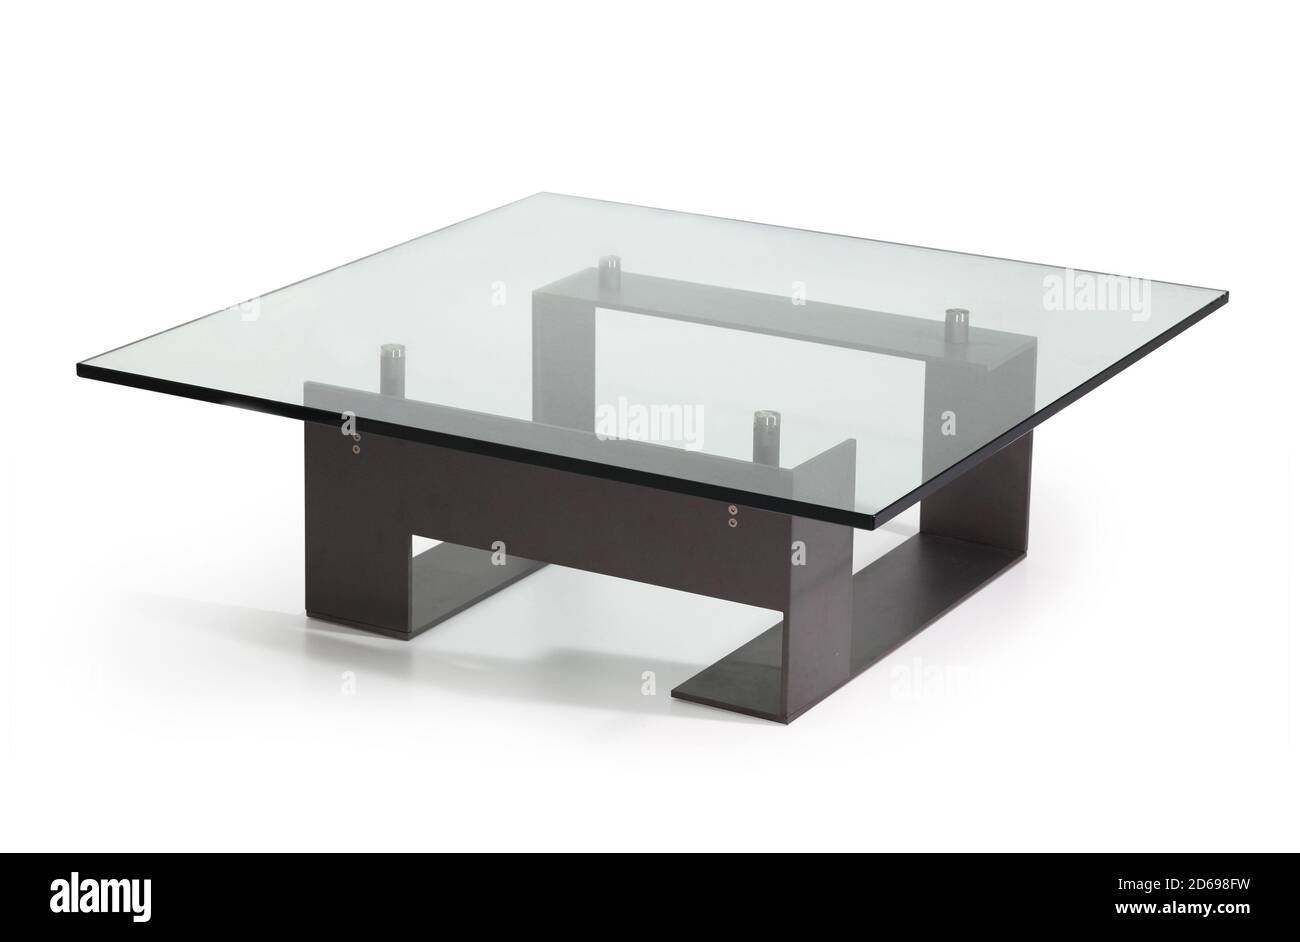 Square shapes modern coffee table on white background Stock Photo